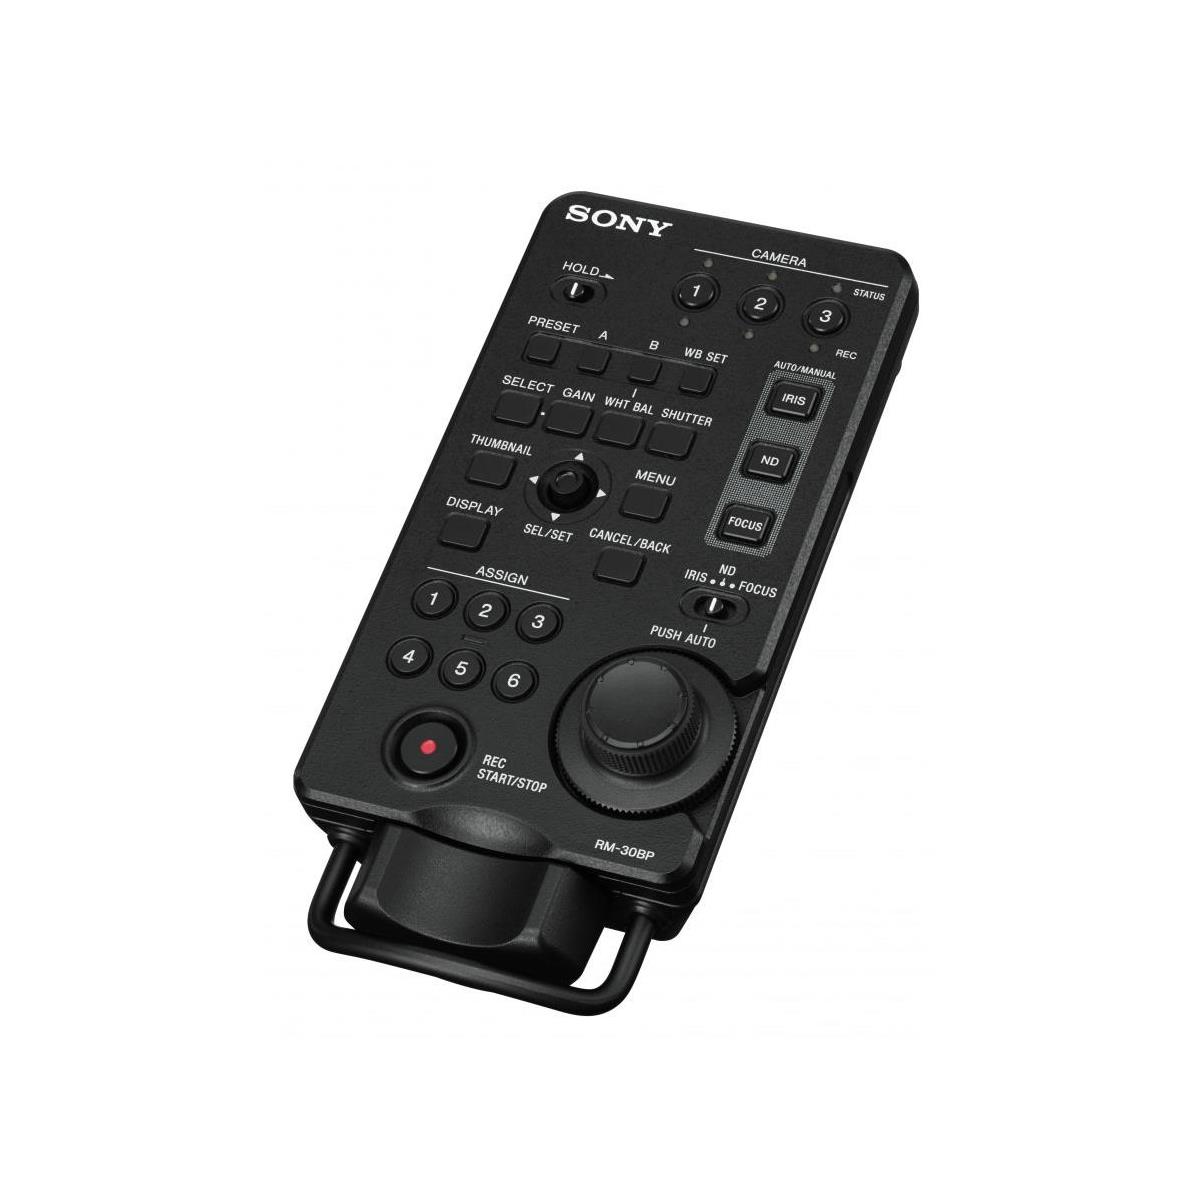 

Sony RM-30BP Wired Remote Controller for HXR-NX5R and PXW-FS7 v4.0 Camera